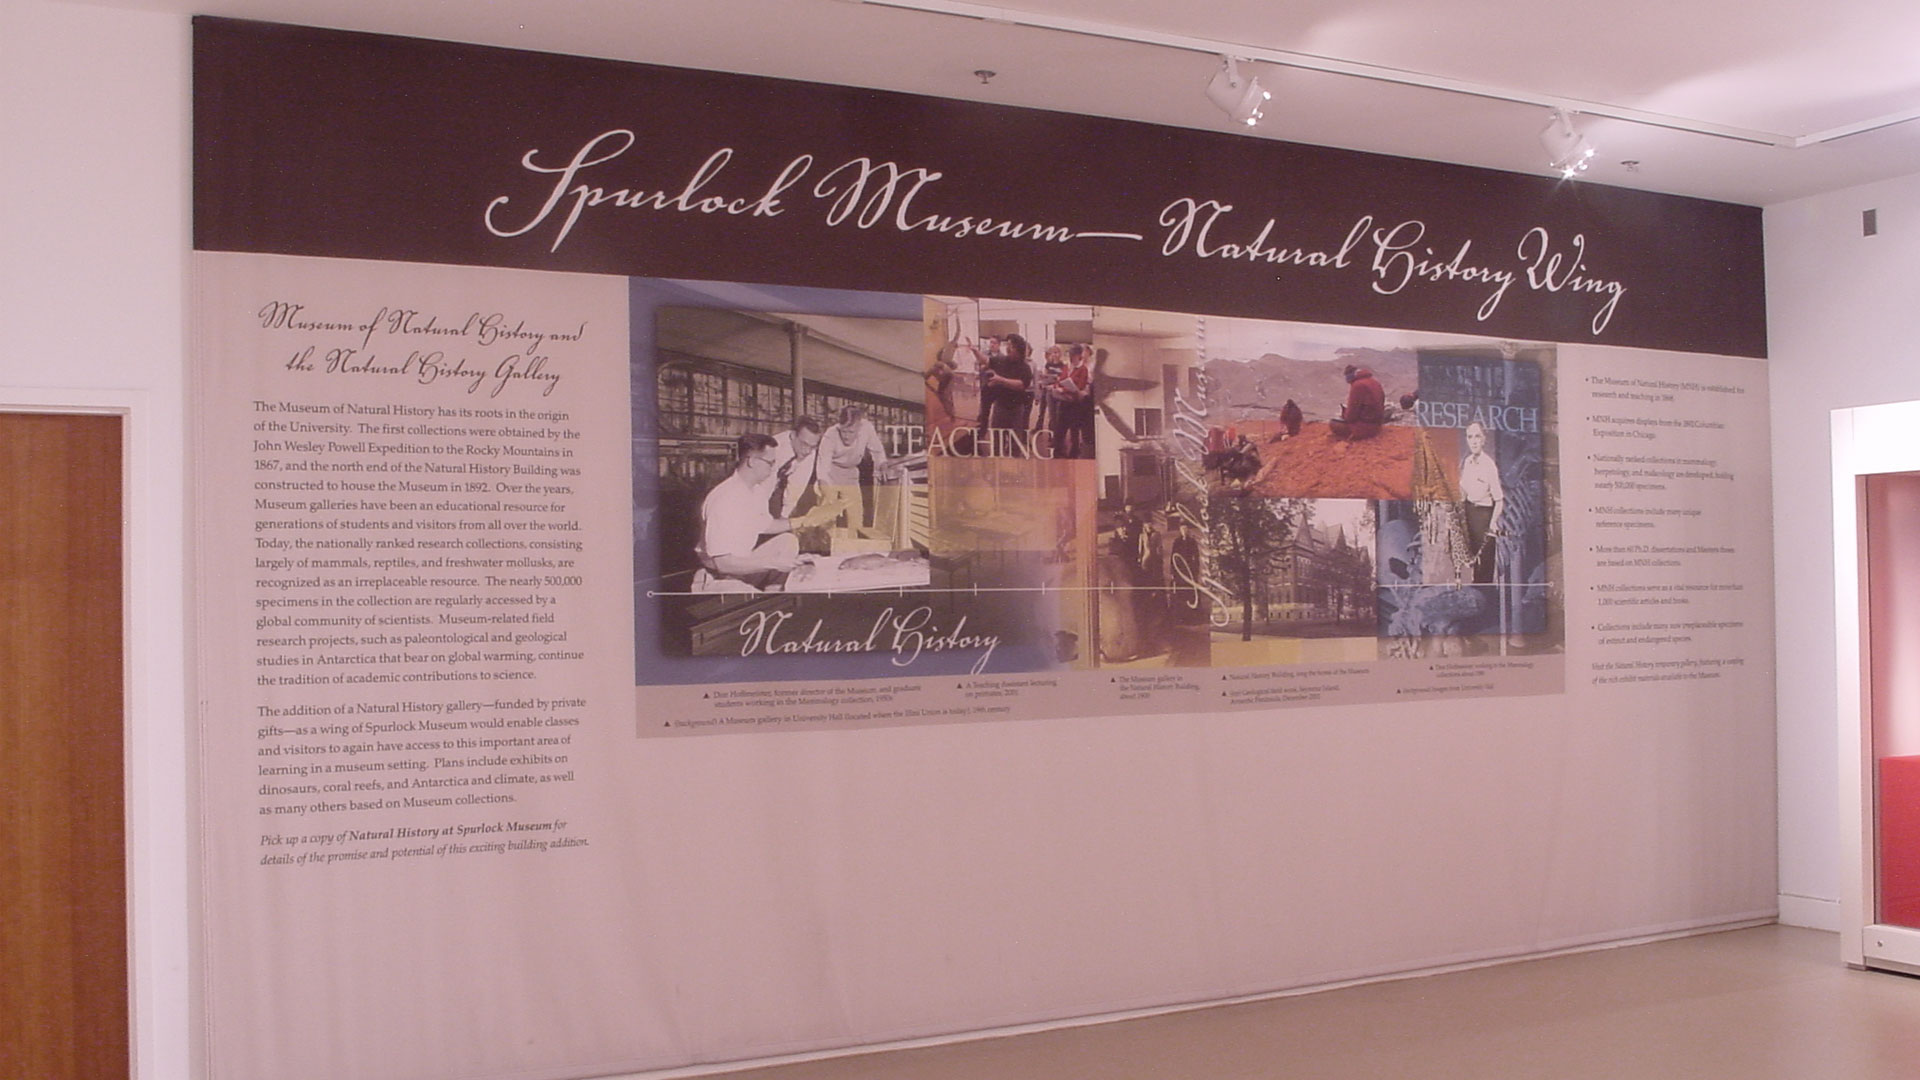 view of wall that says Spurlock Museum—Natural History Wing with a collage of images and text explaining the wing